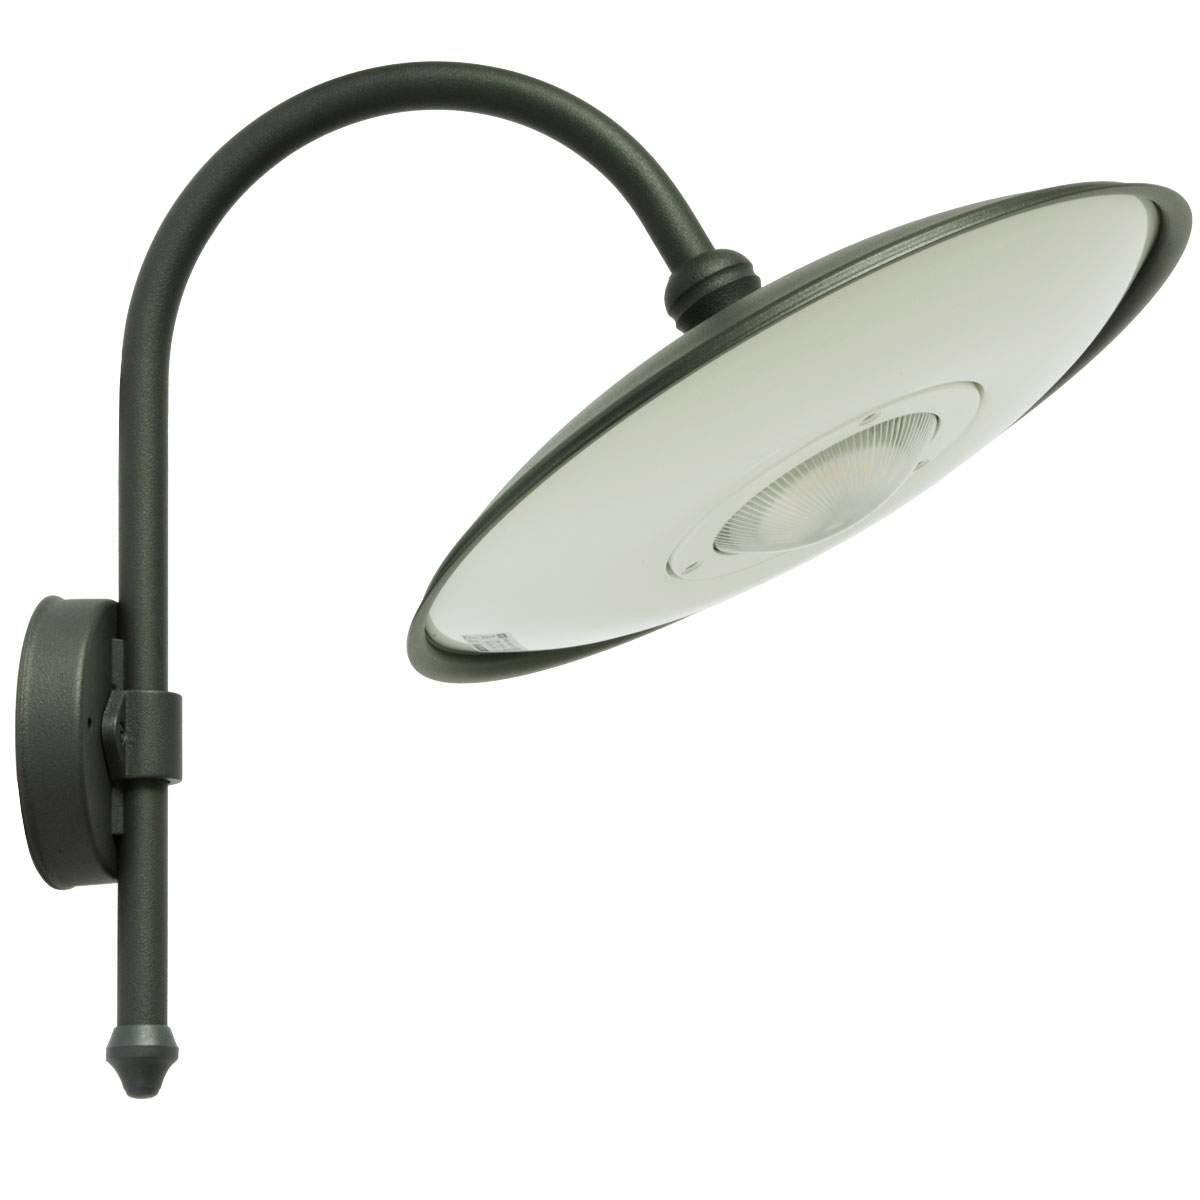 Directional LED Wall Light for Outdoors